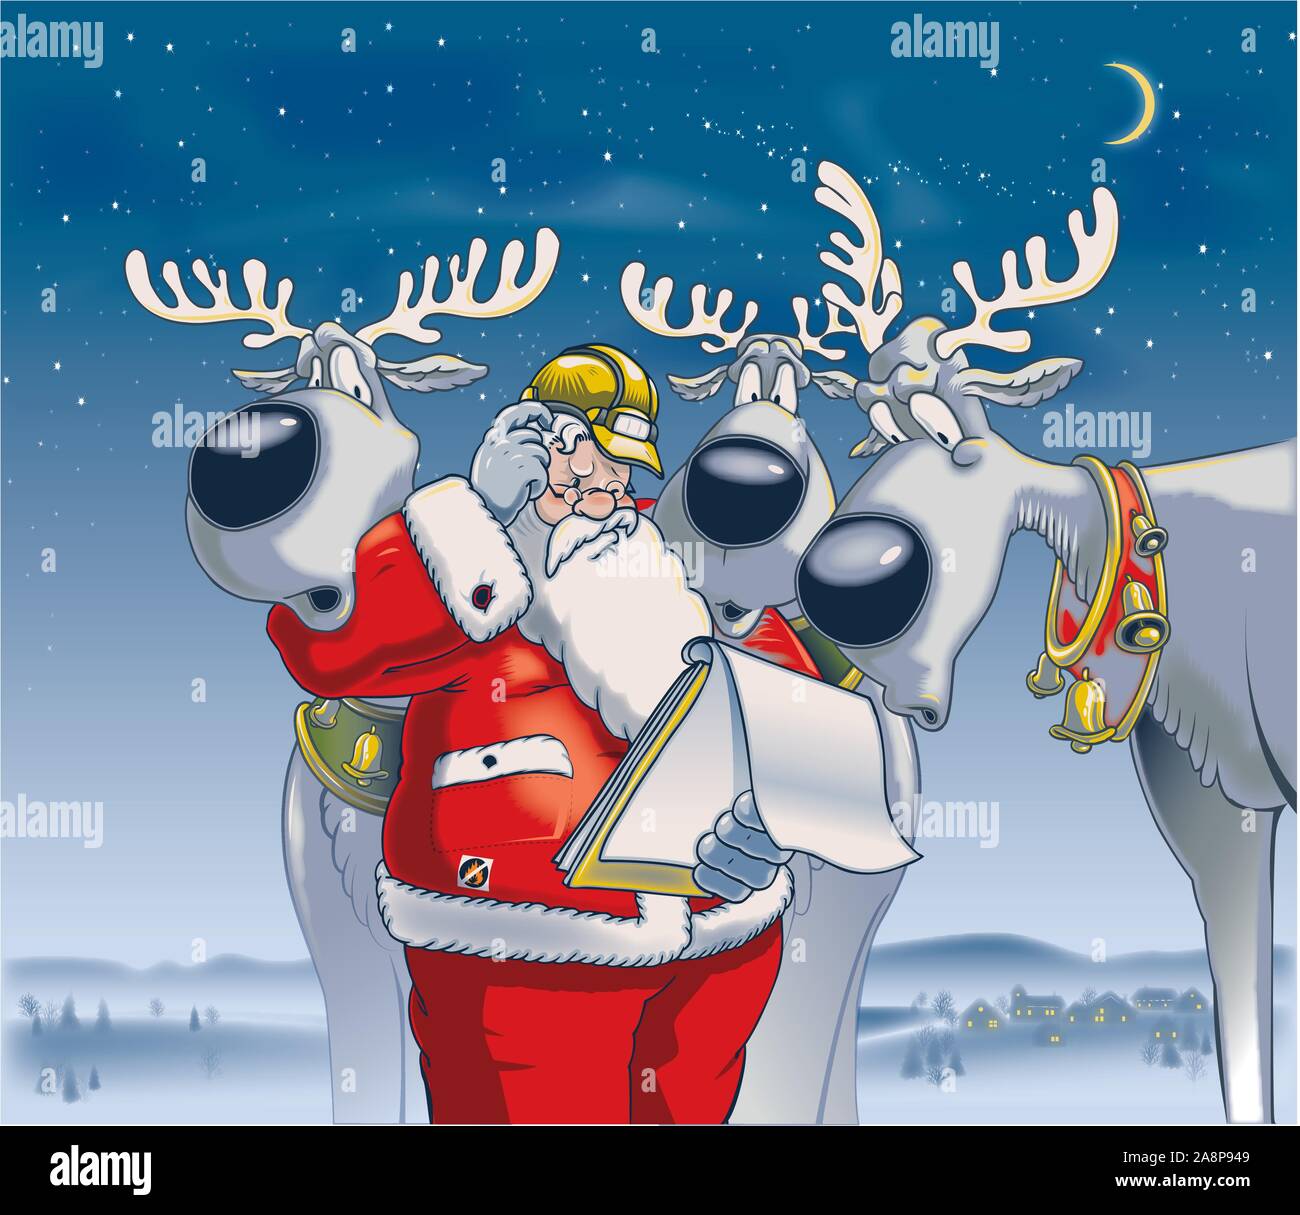 Illustration with a pensive Santa Claus reading a letter with three curious reindeer. In the background starry sky and snow-covered landscape Stock Vector